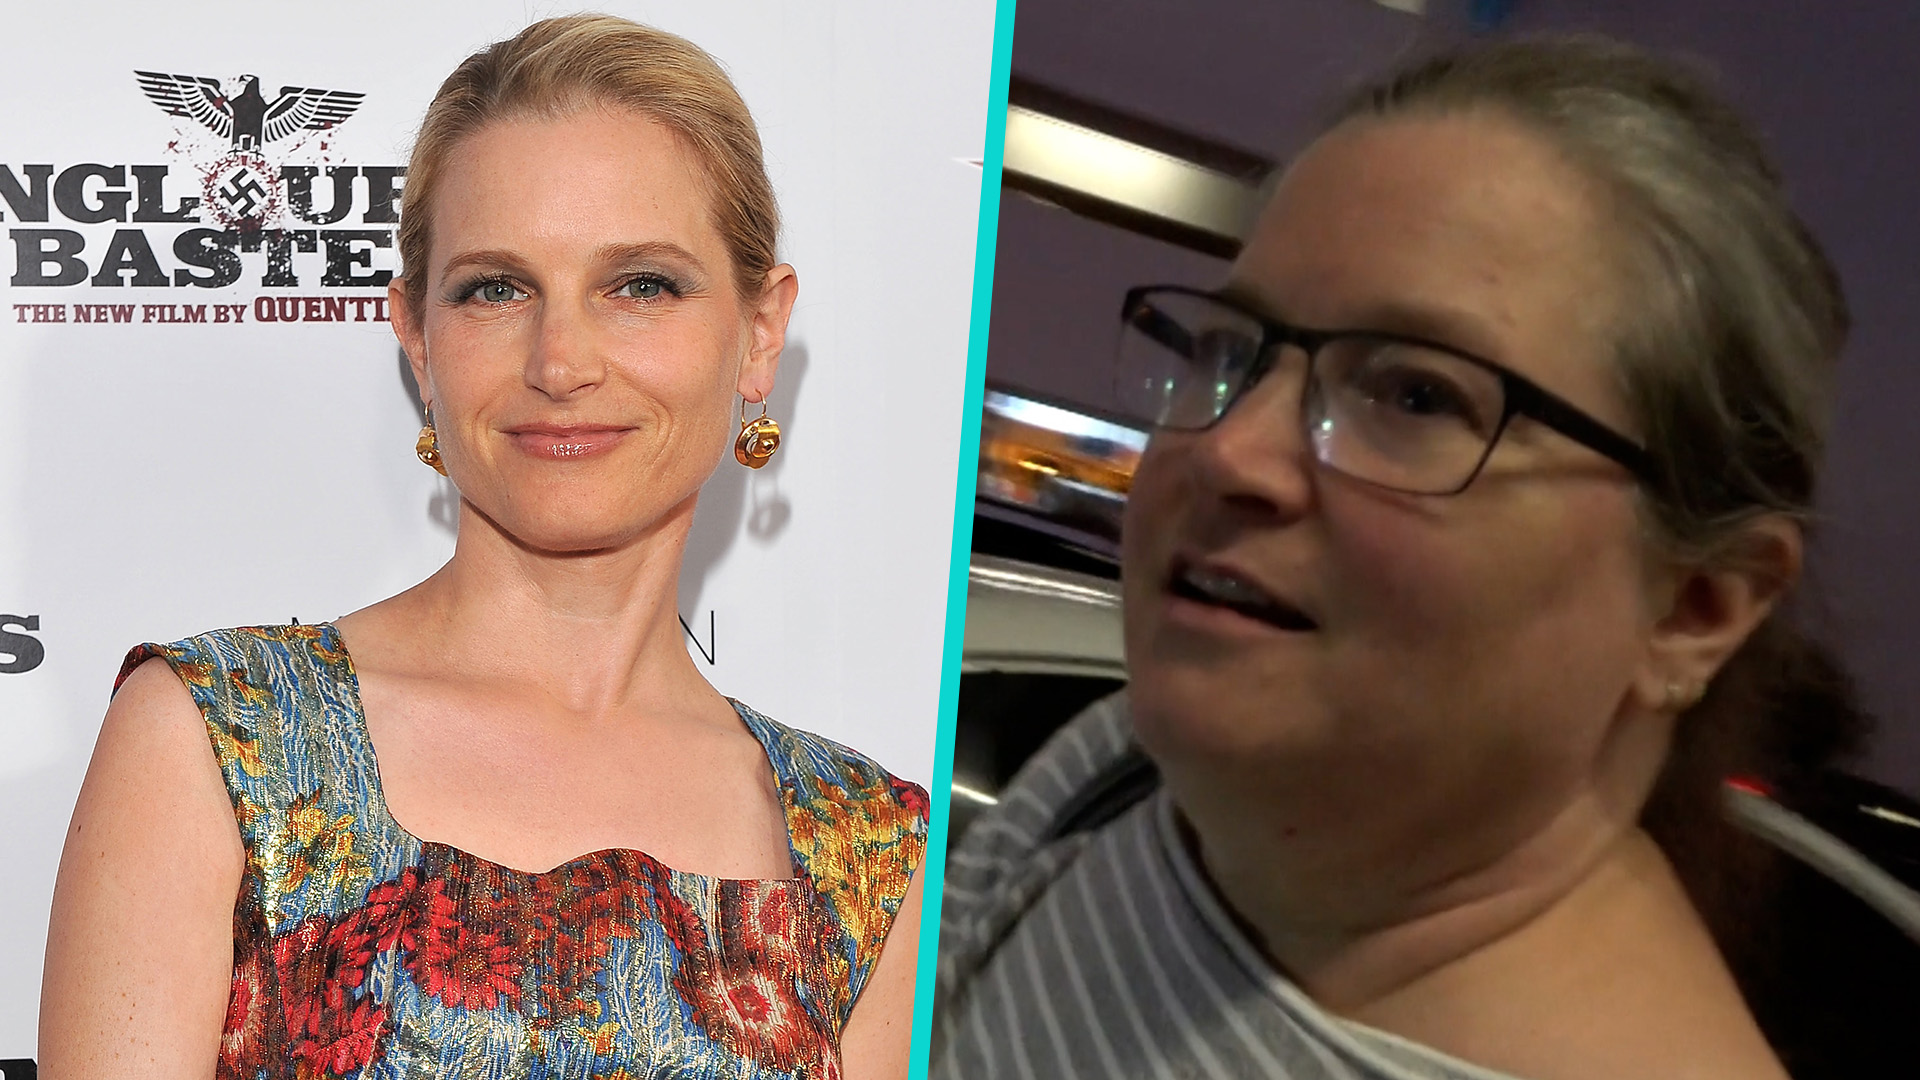 Bridget Fonda's crazy net worth revealed after first public spot in 12 years